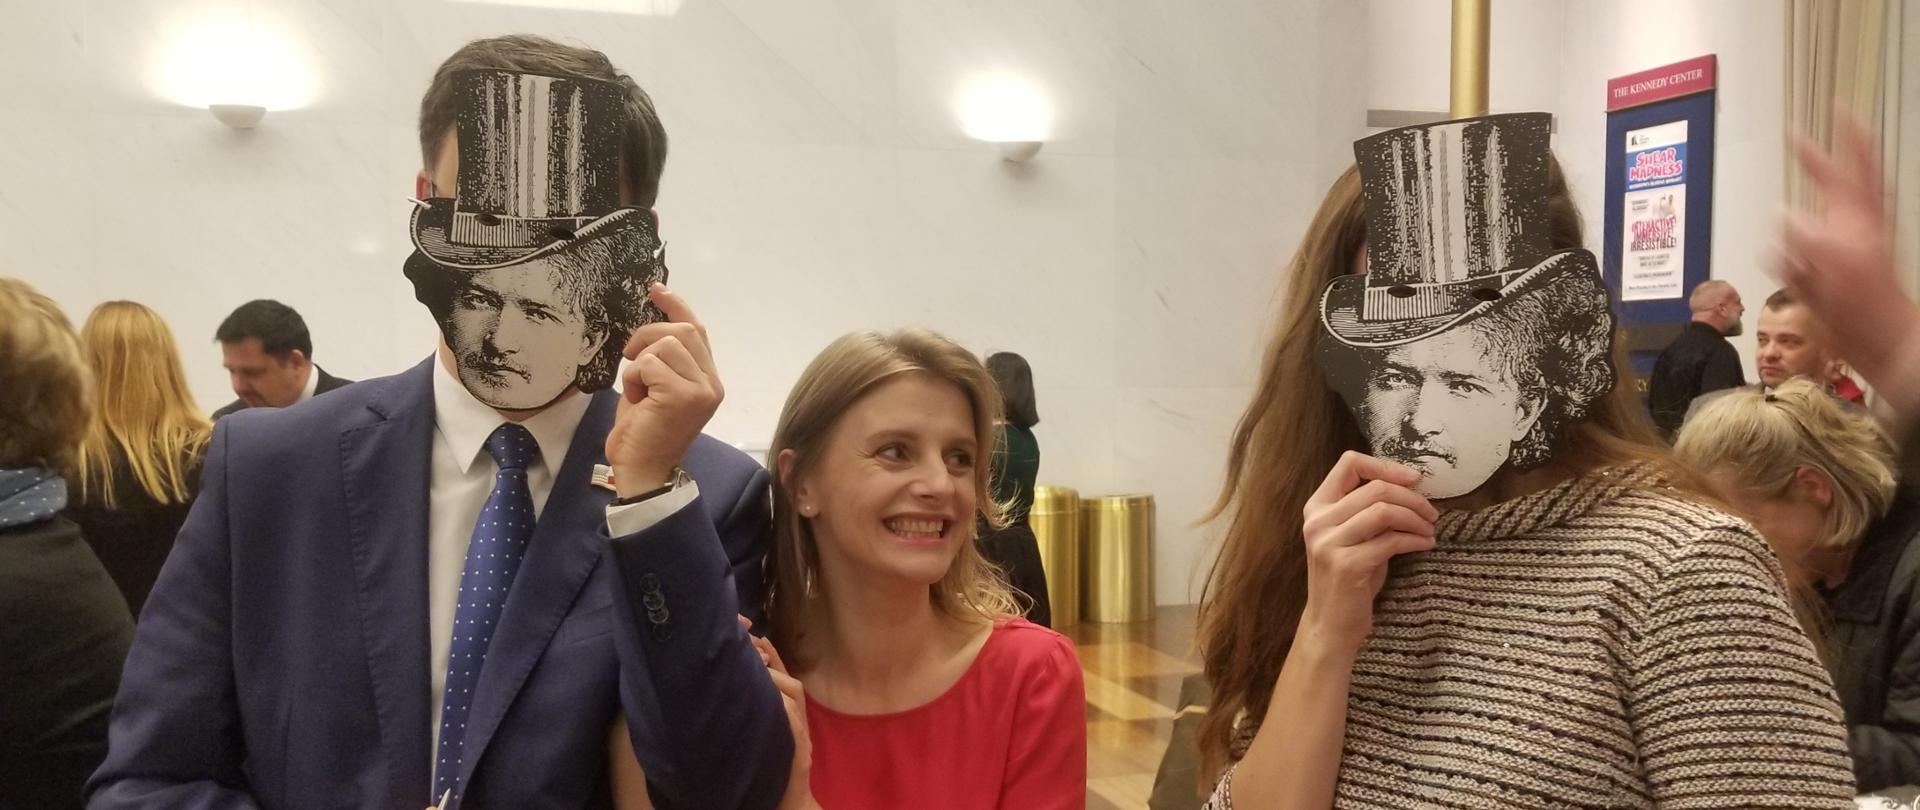 Three people attending the premiere of "3 Paderewskis," with two of them wearing masks featuring the likeness of Paderewski 